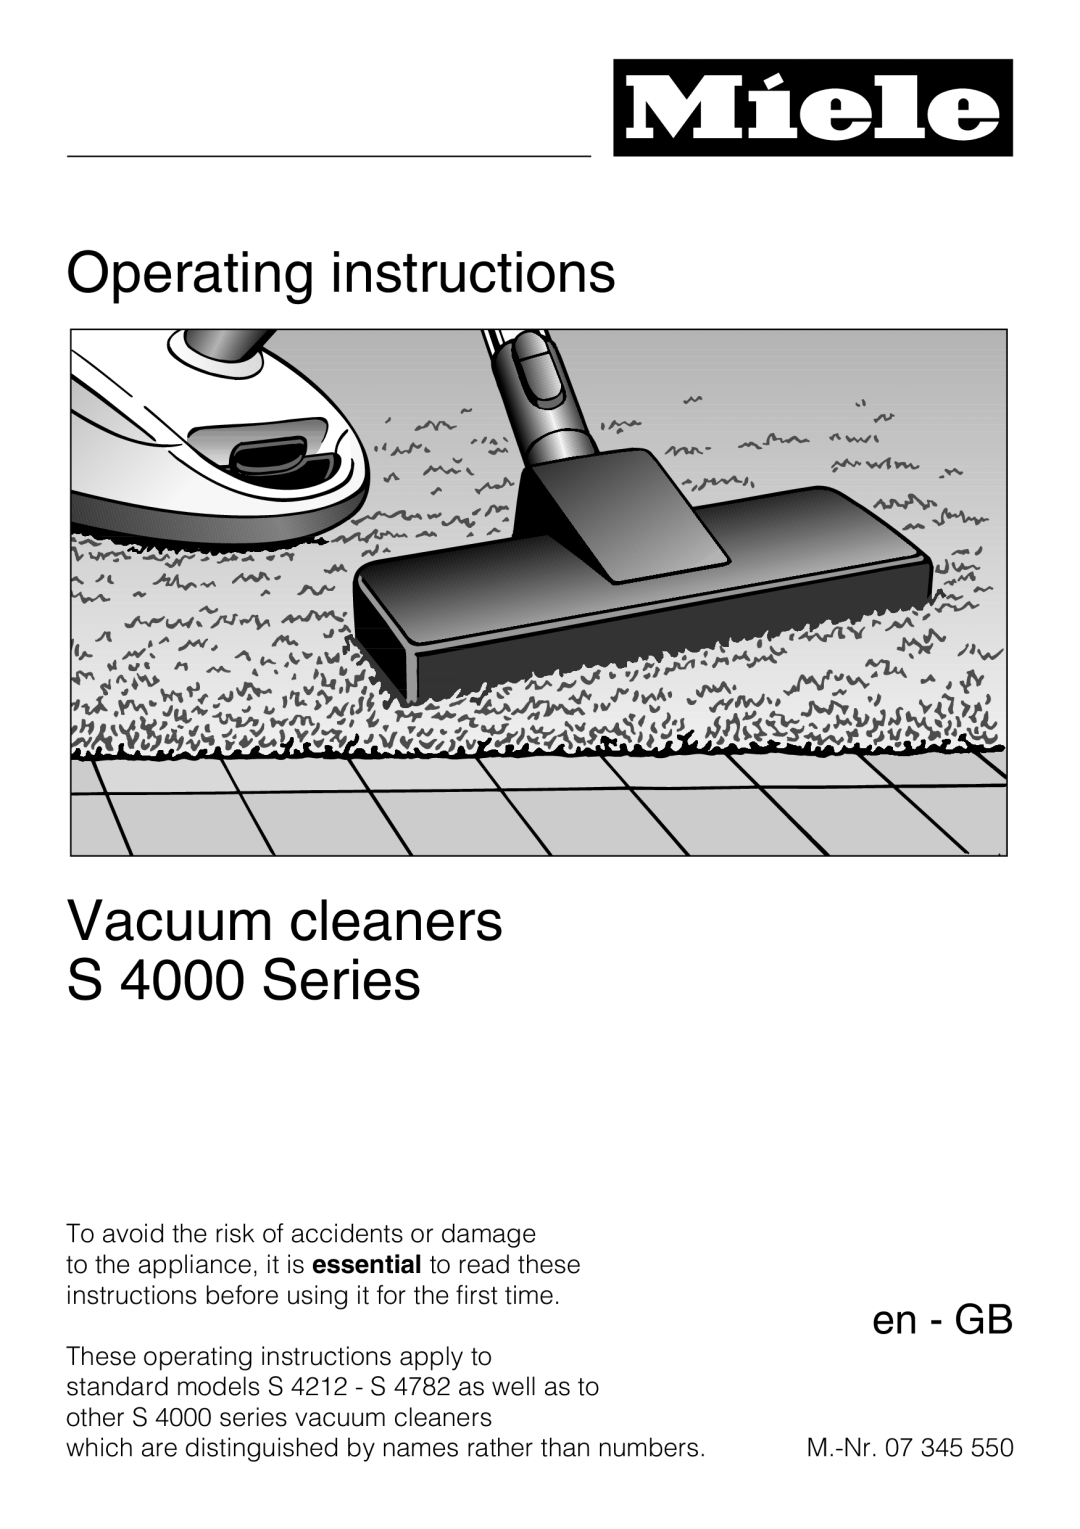 Miele S4212 manual Operating instructions Vacuum cleaners, S 4000 Series, en - GB 